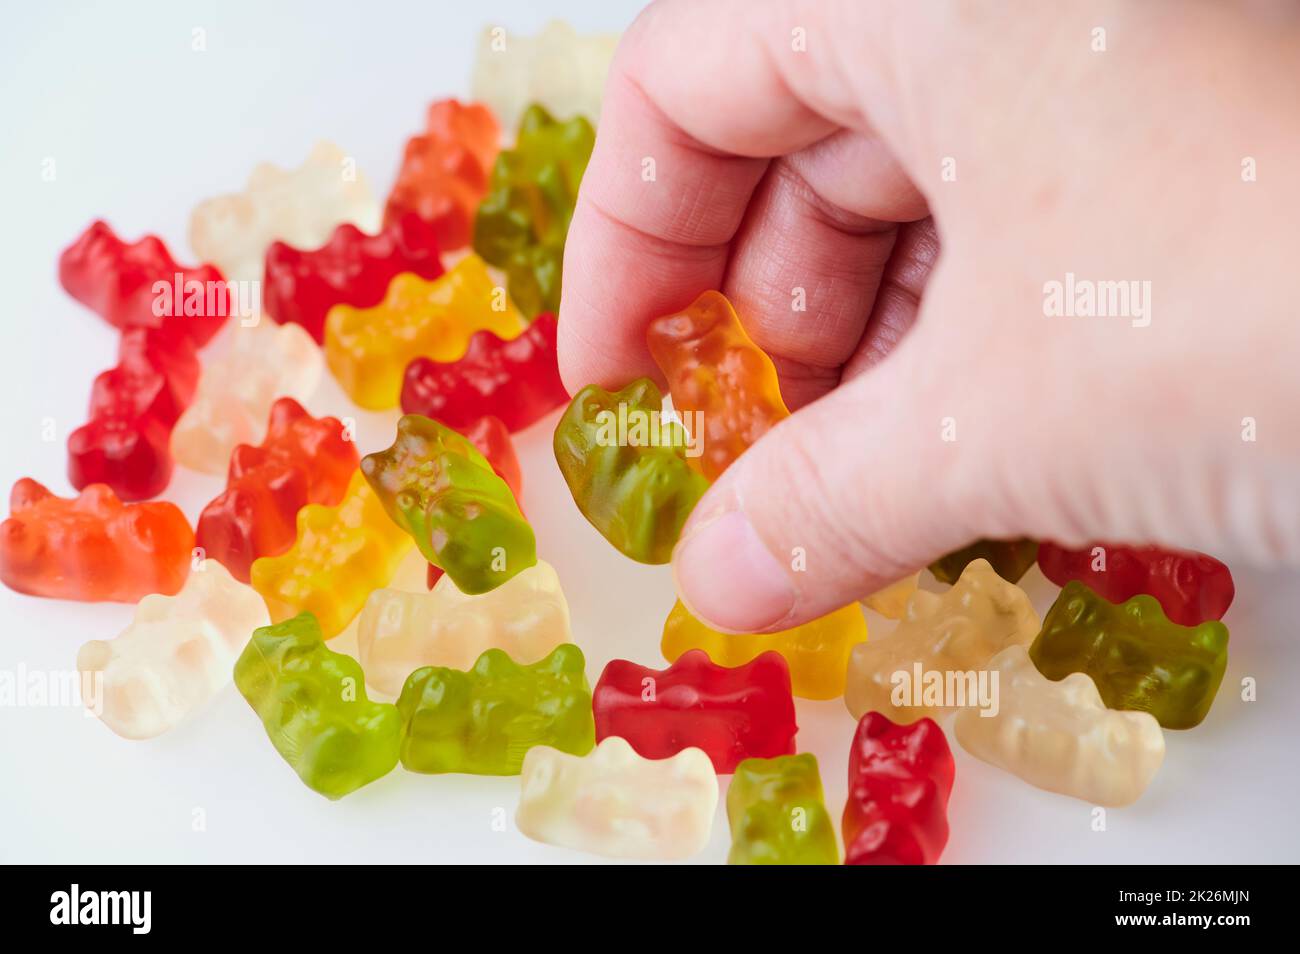 woman hand taking away two gummy bears from a pile Stock Photo